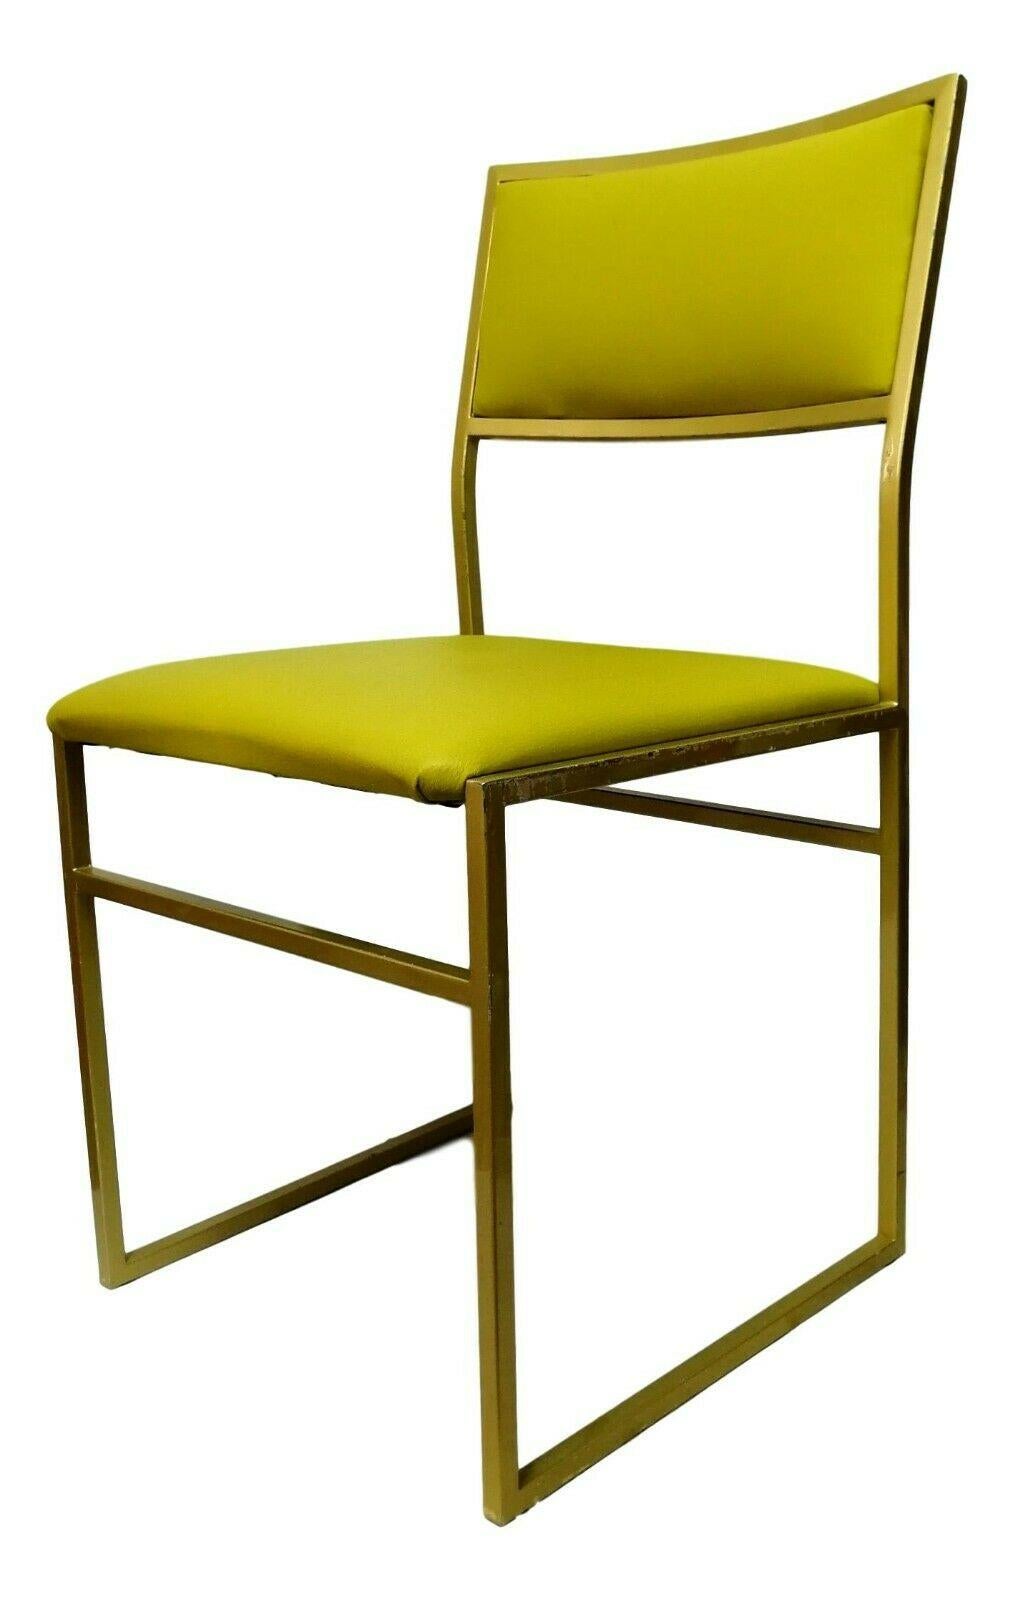 coloured metal chairs